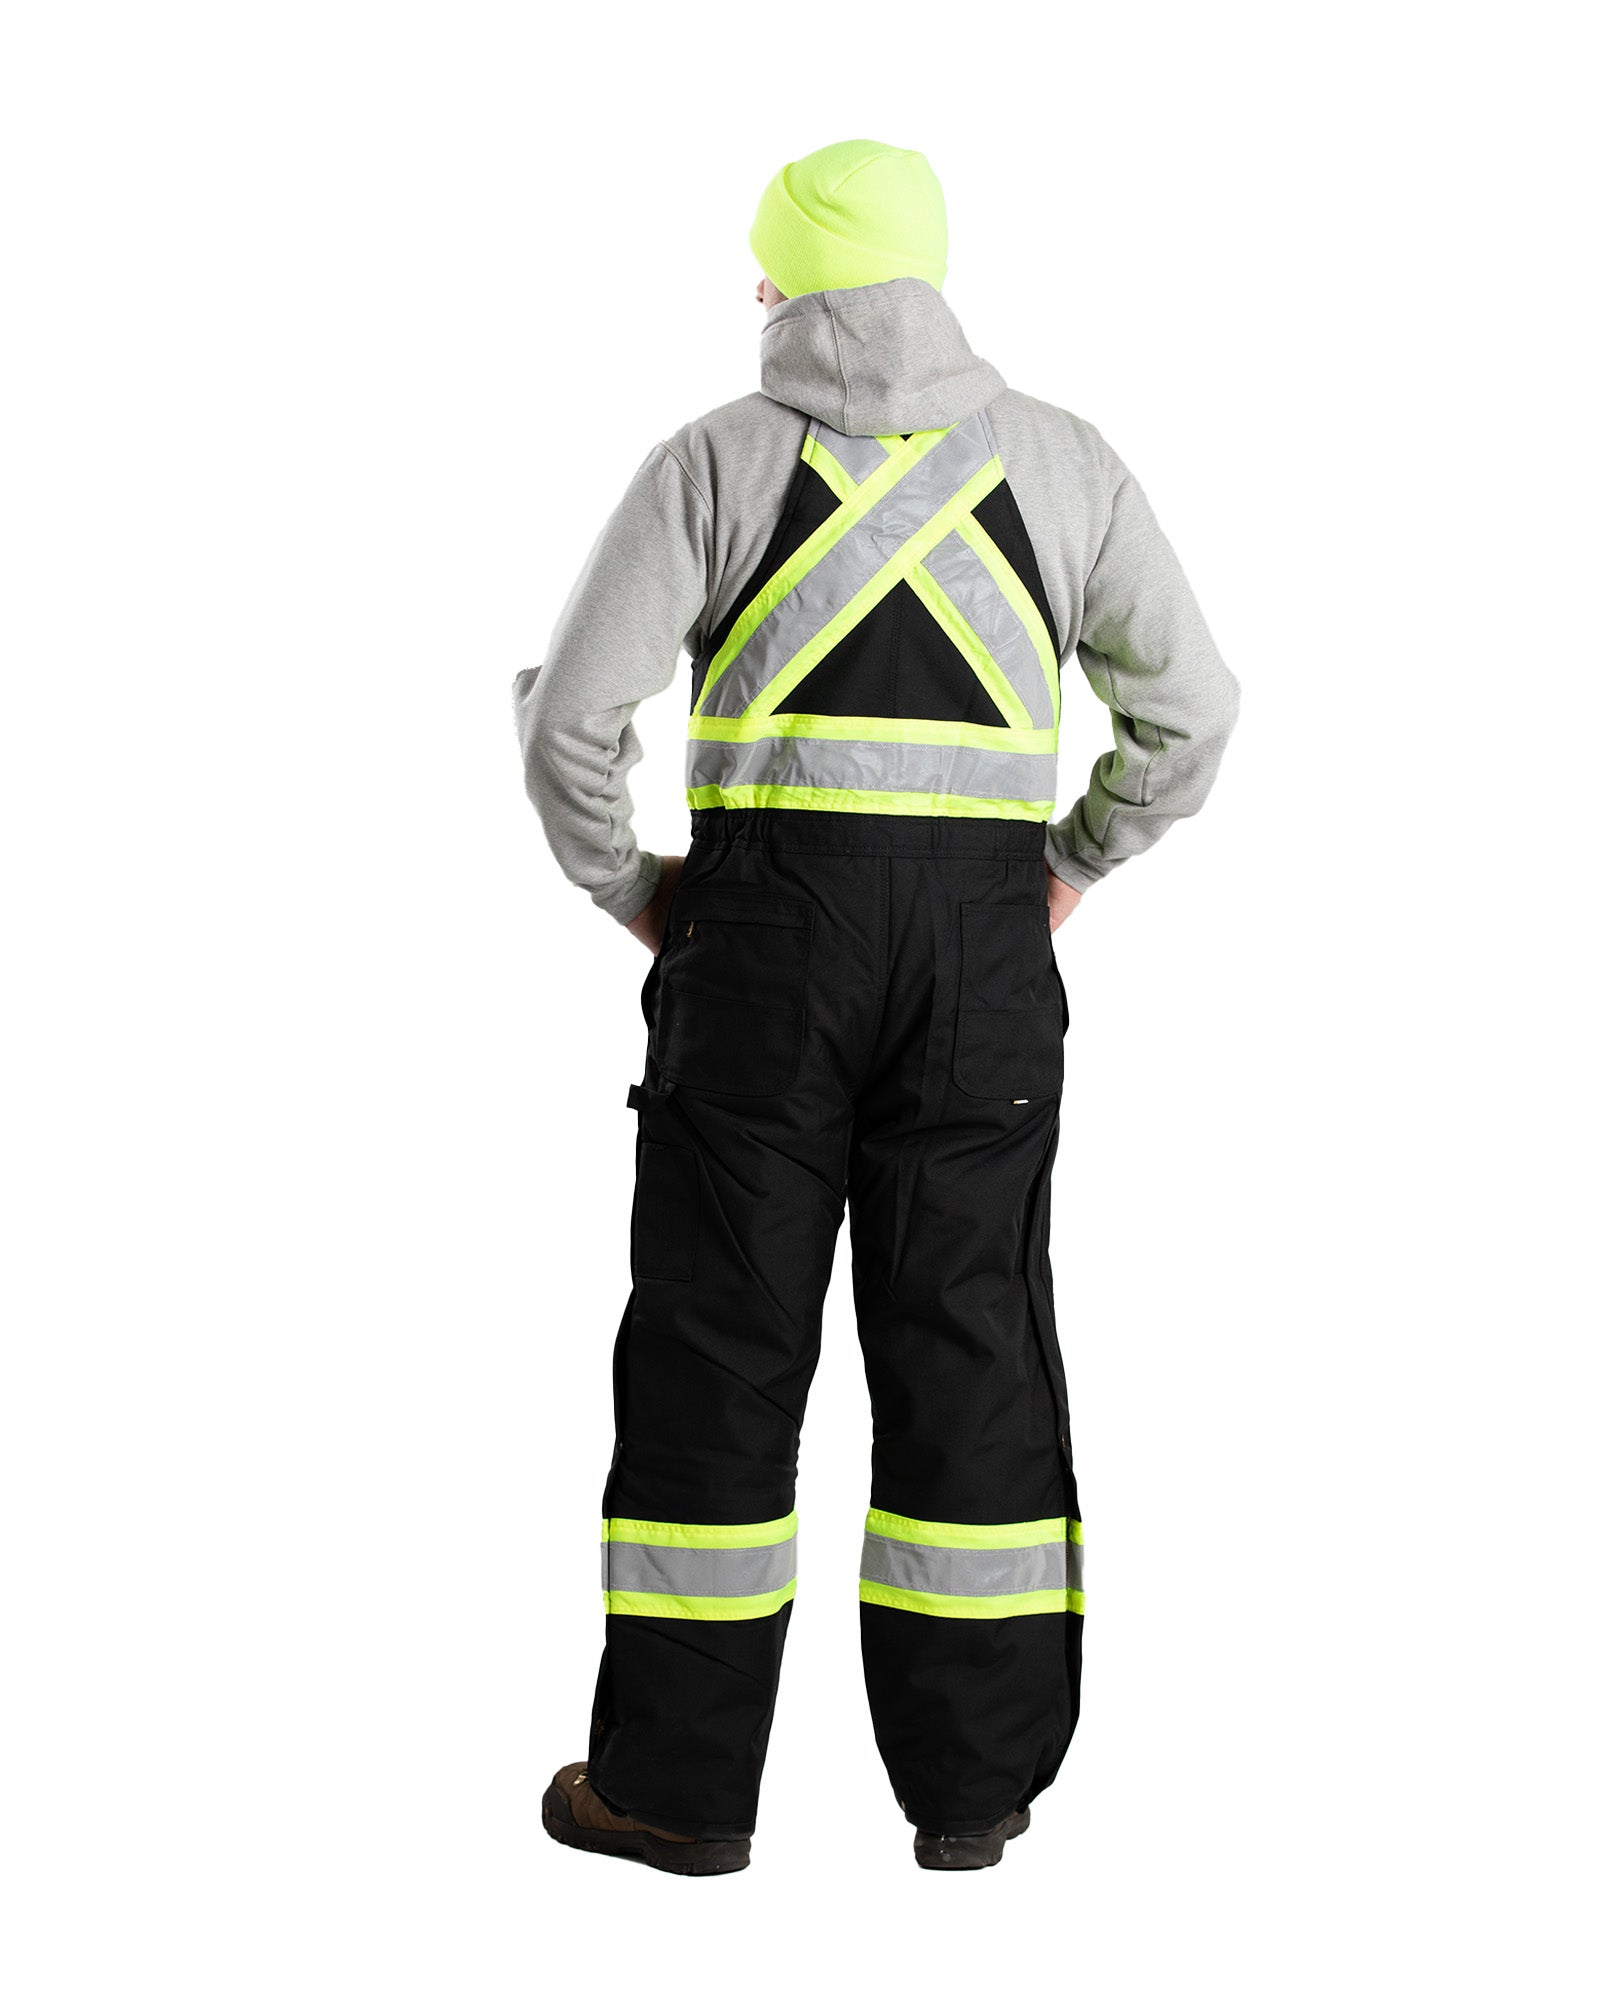 HVNB02BK Safety Striped Arctic Insulated Bib Overall